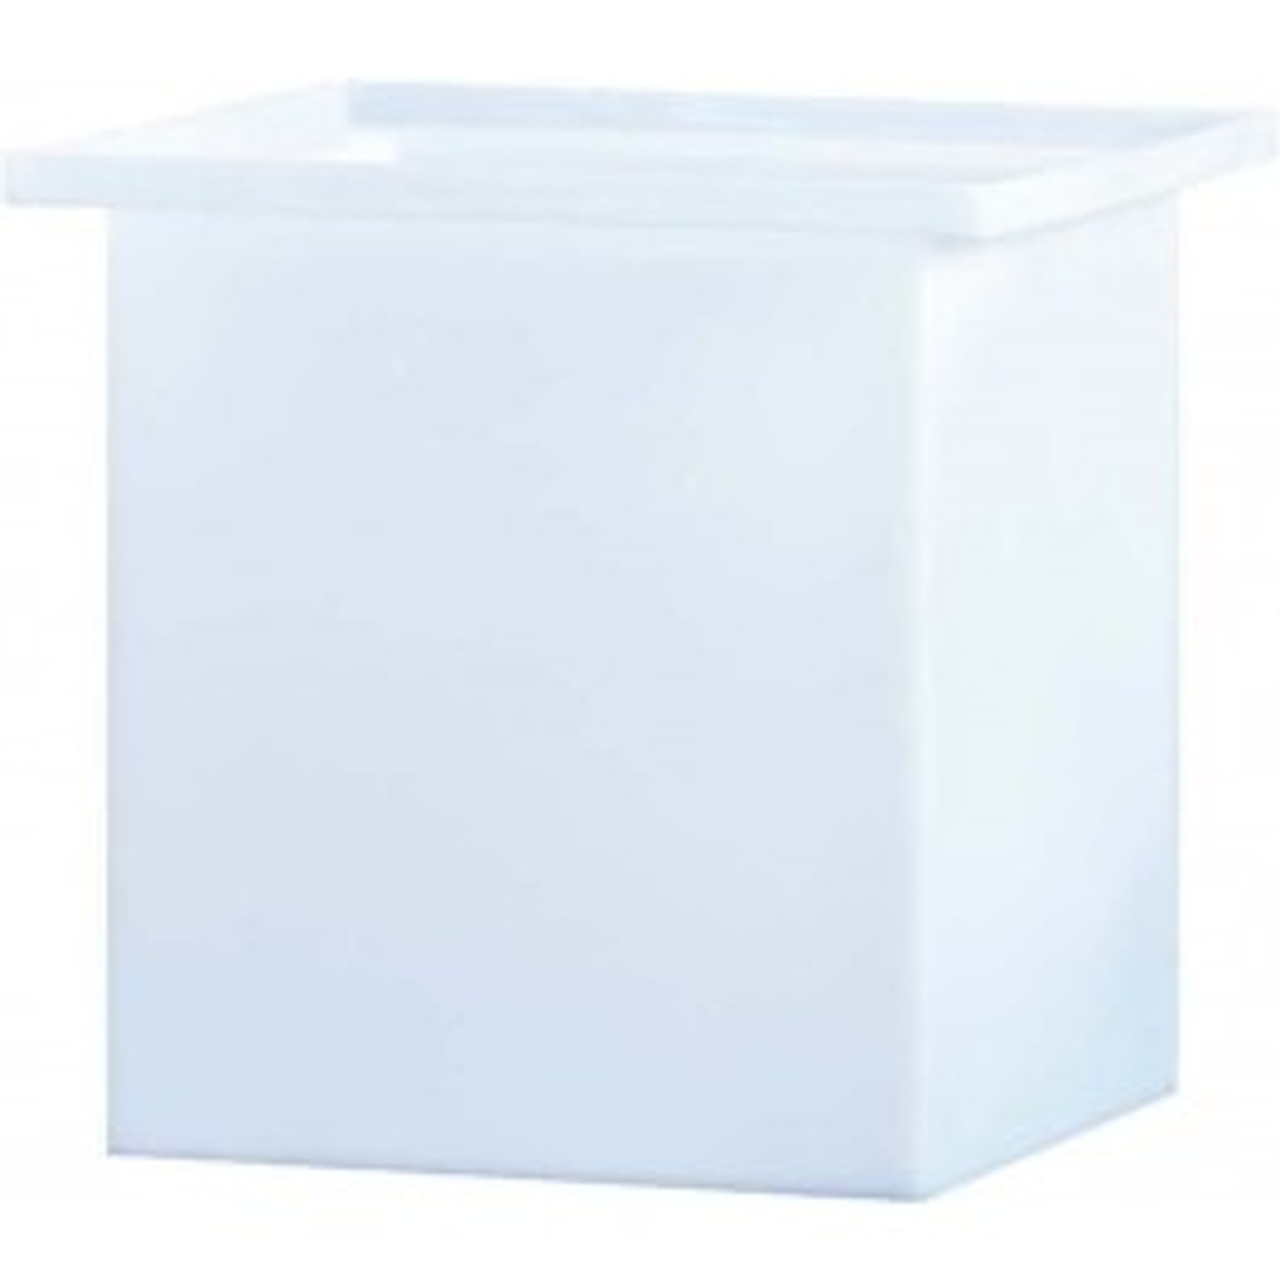 An image of a 60 Gallon PE Chem-Tainer White Rectangular Open Top Tank | R242424A